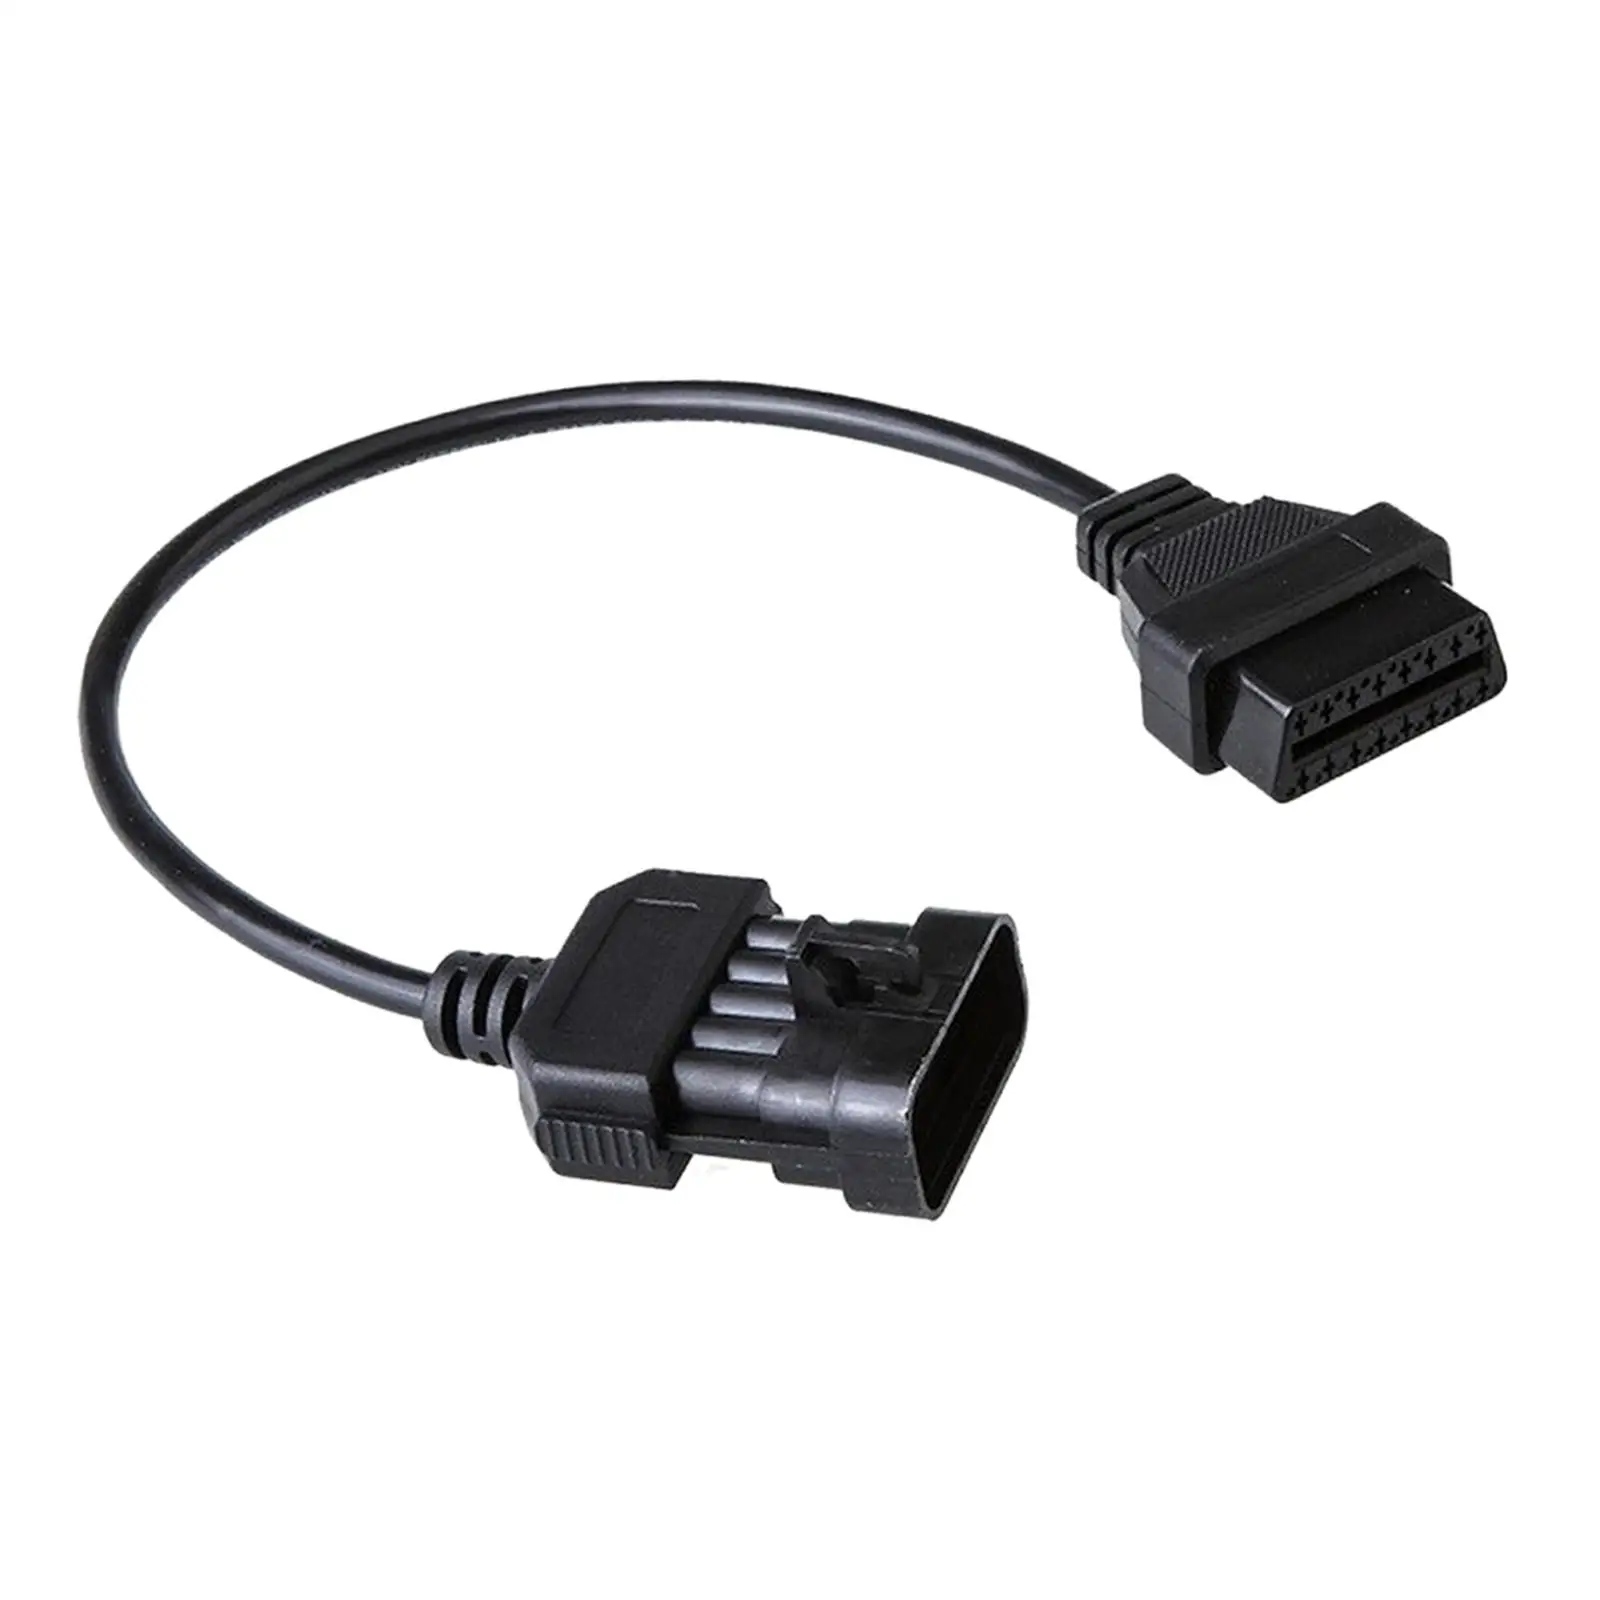 OBDII Extension Cable Replaces Male to Female Spare Parts Connector Auto Tool OBDII Adapter for 10Pin to OBDII 16Pin